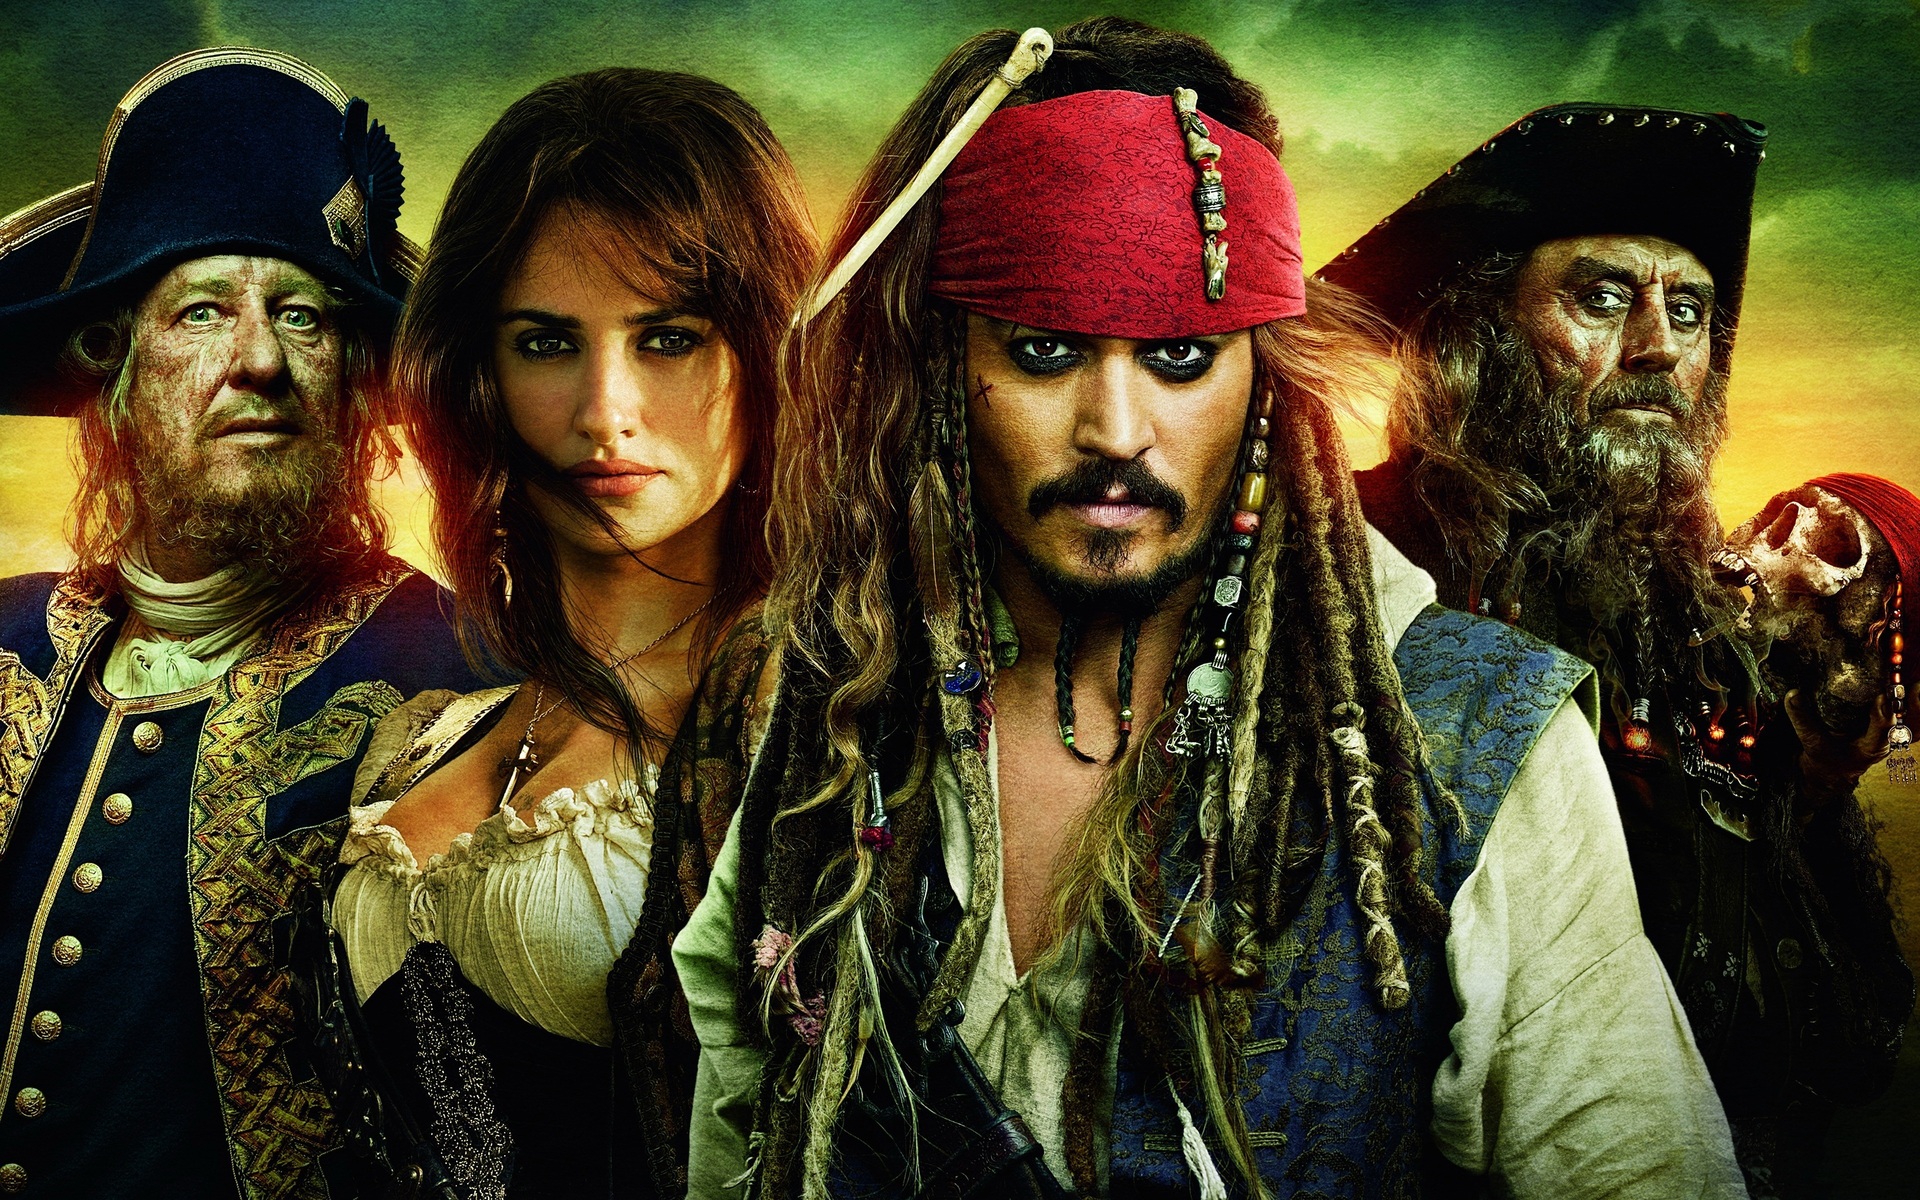 PIRATES OF THE CARIBBEAN: ON STRANGER TIDES (2011) Reviews and overview